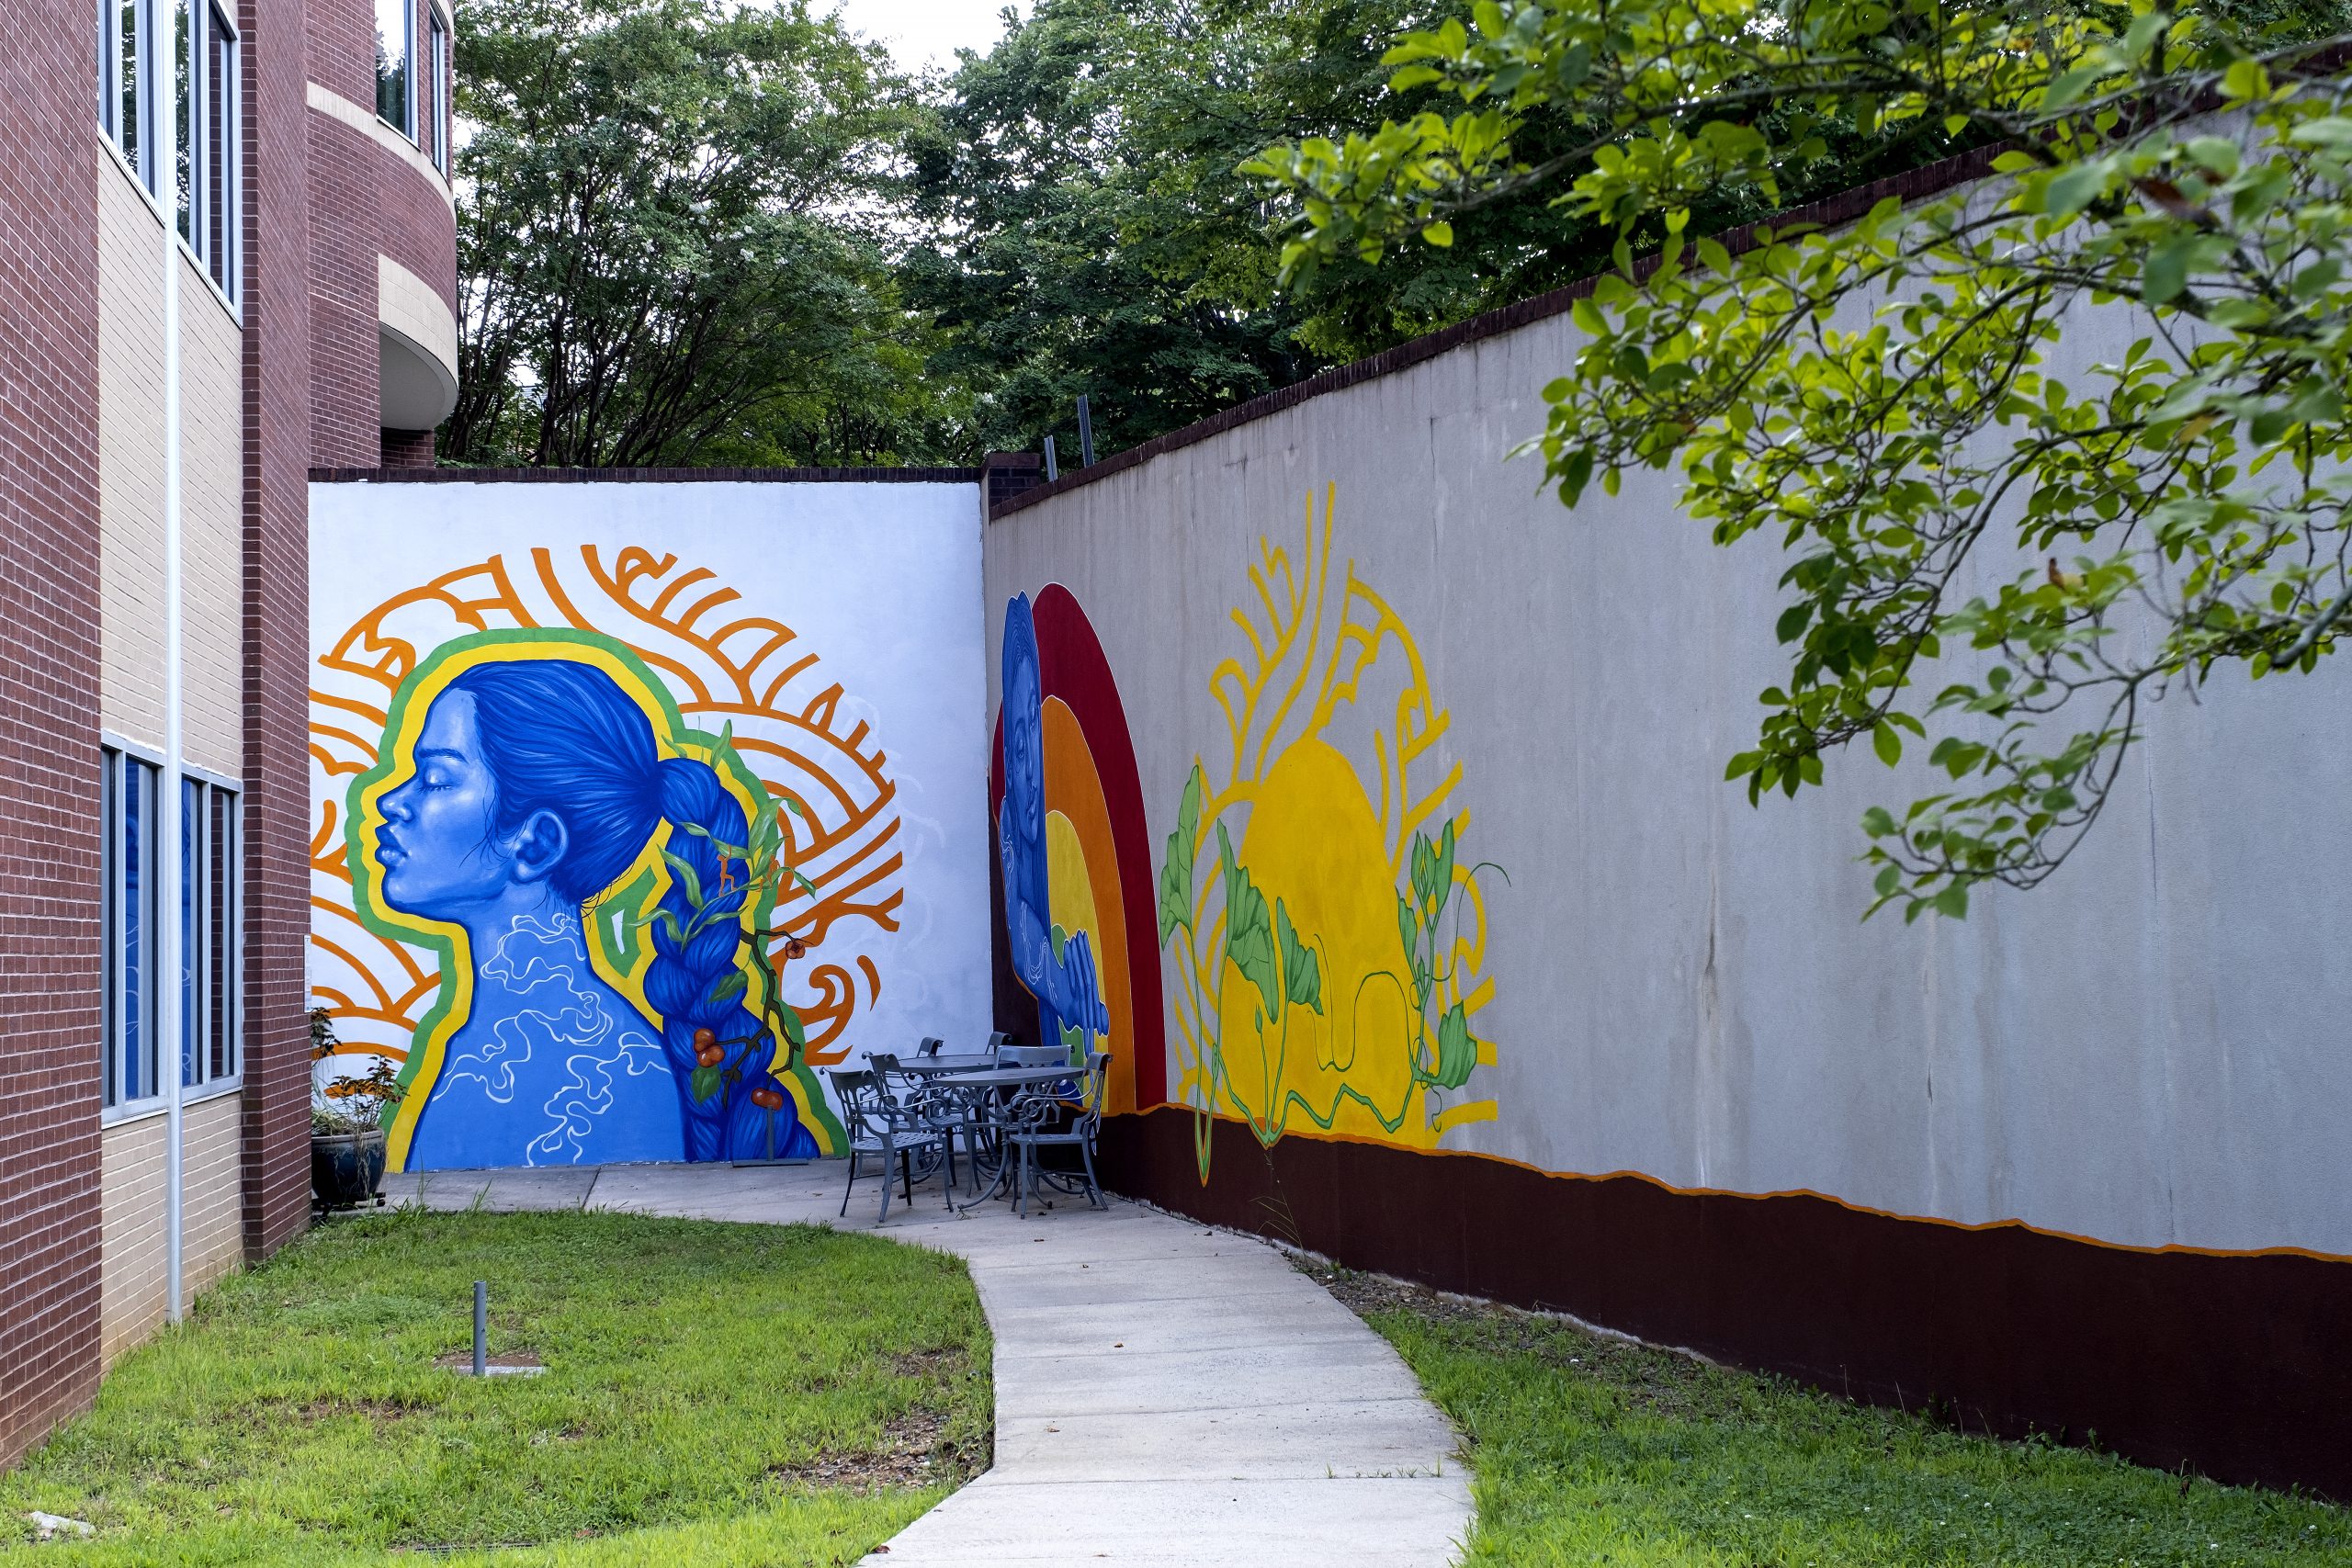 Outdoor courtyard and mural at Center for Health Promotion and Disease Prevention.